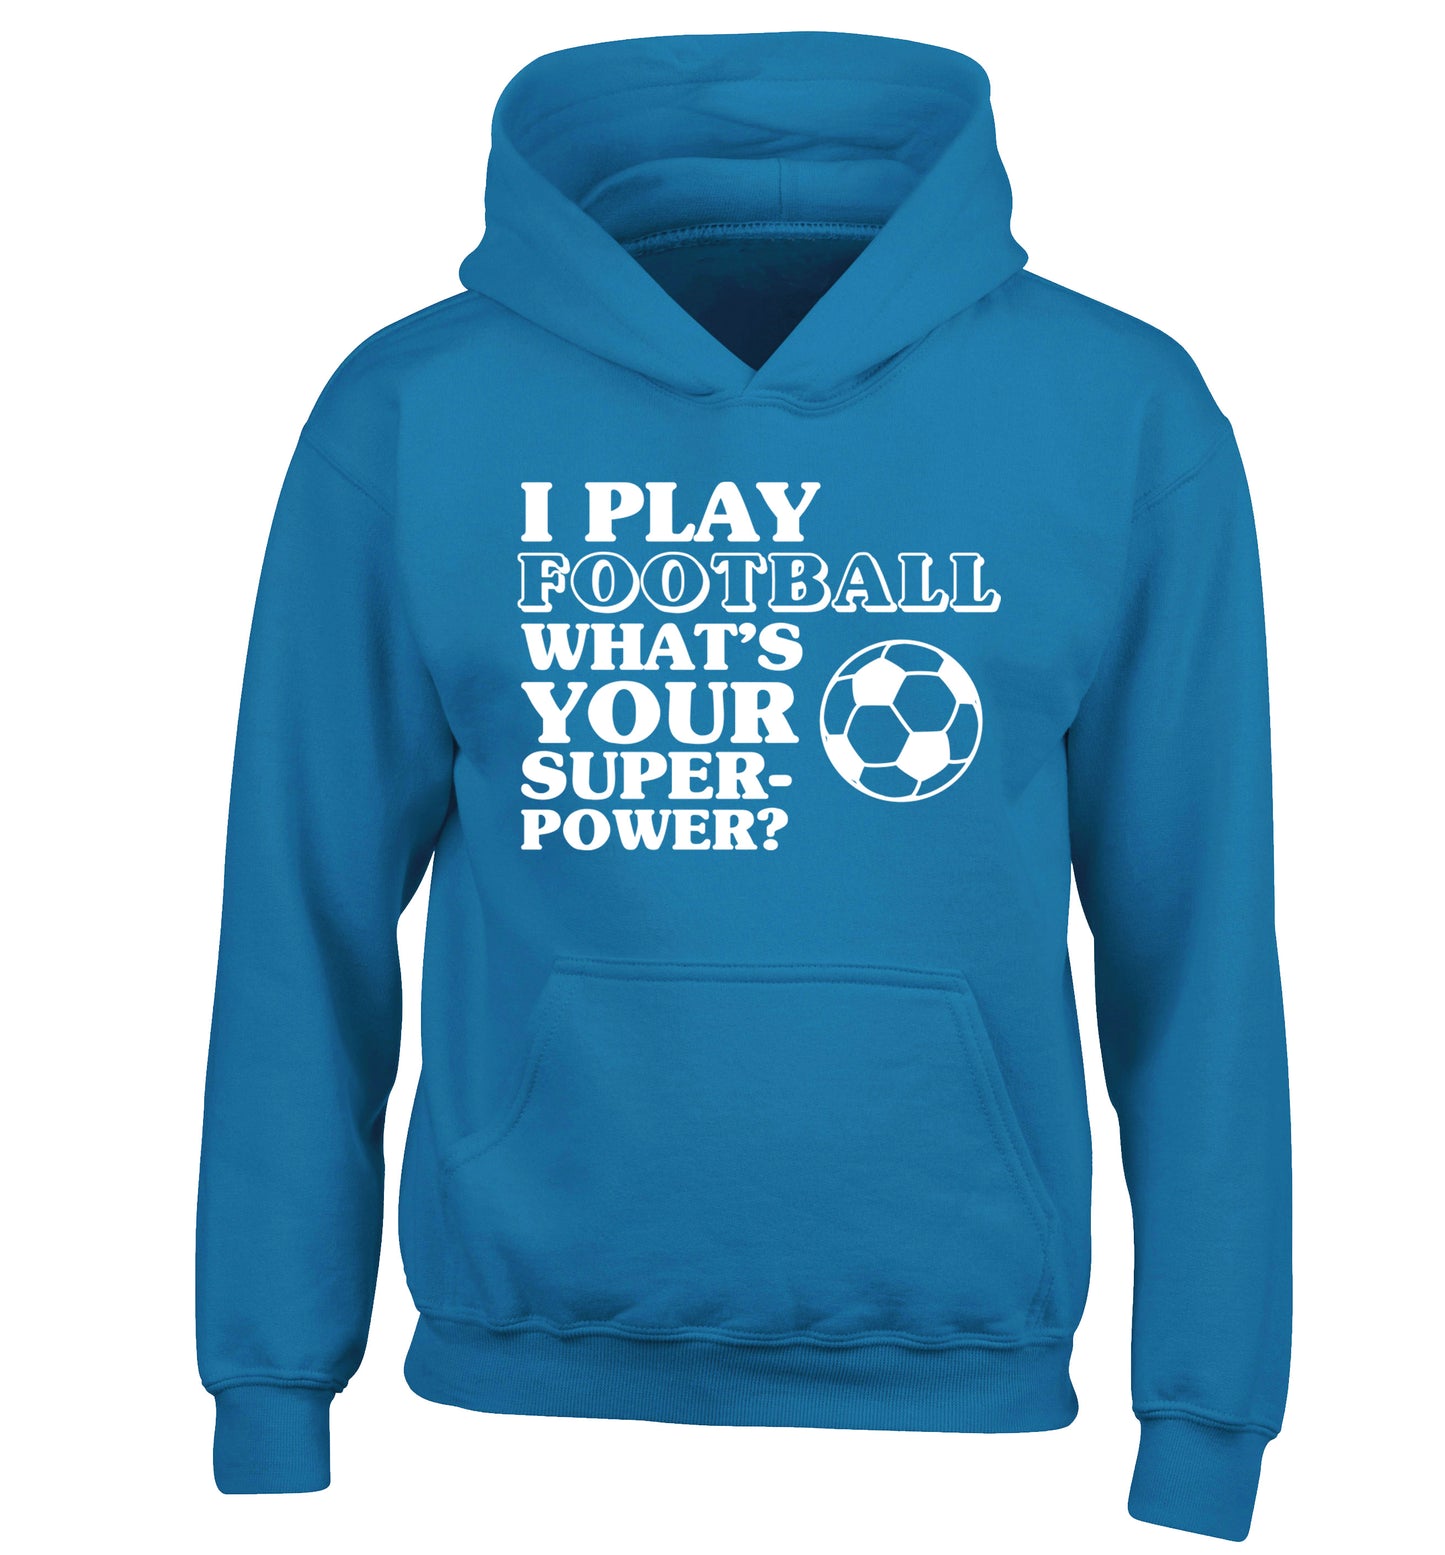 I play football what's your superpower? children's blue hoodie 12-14 Years